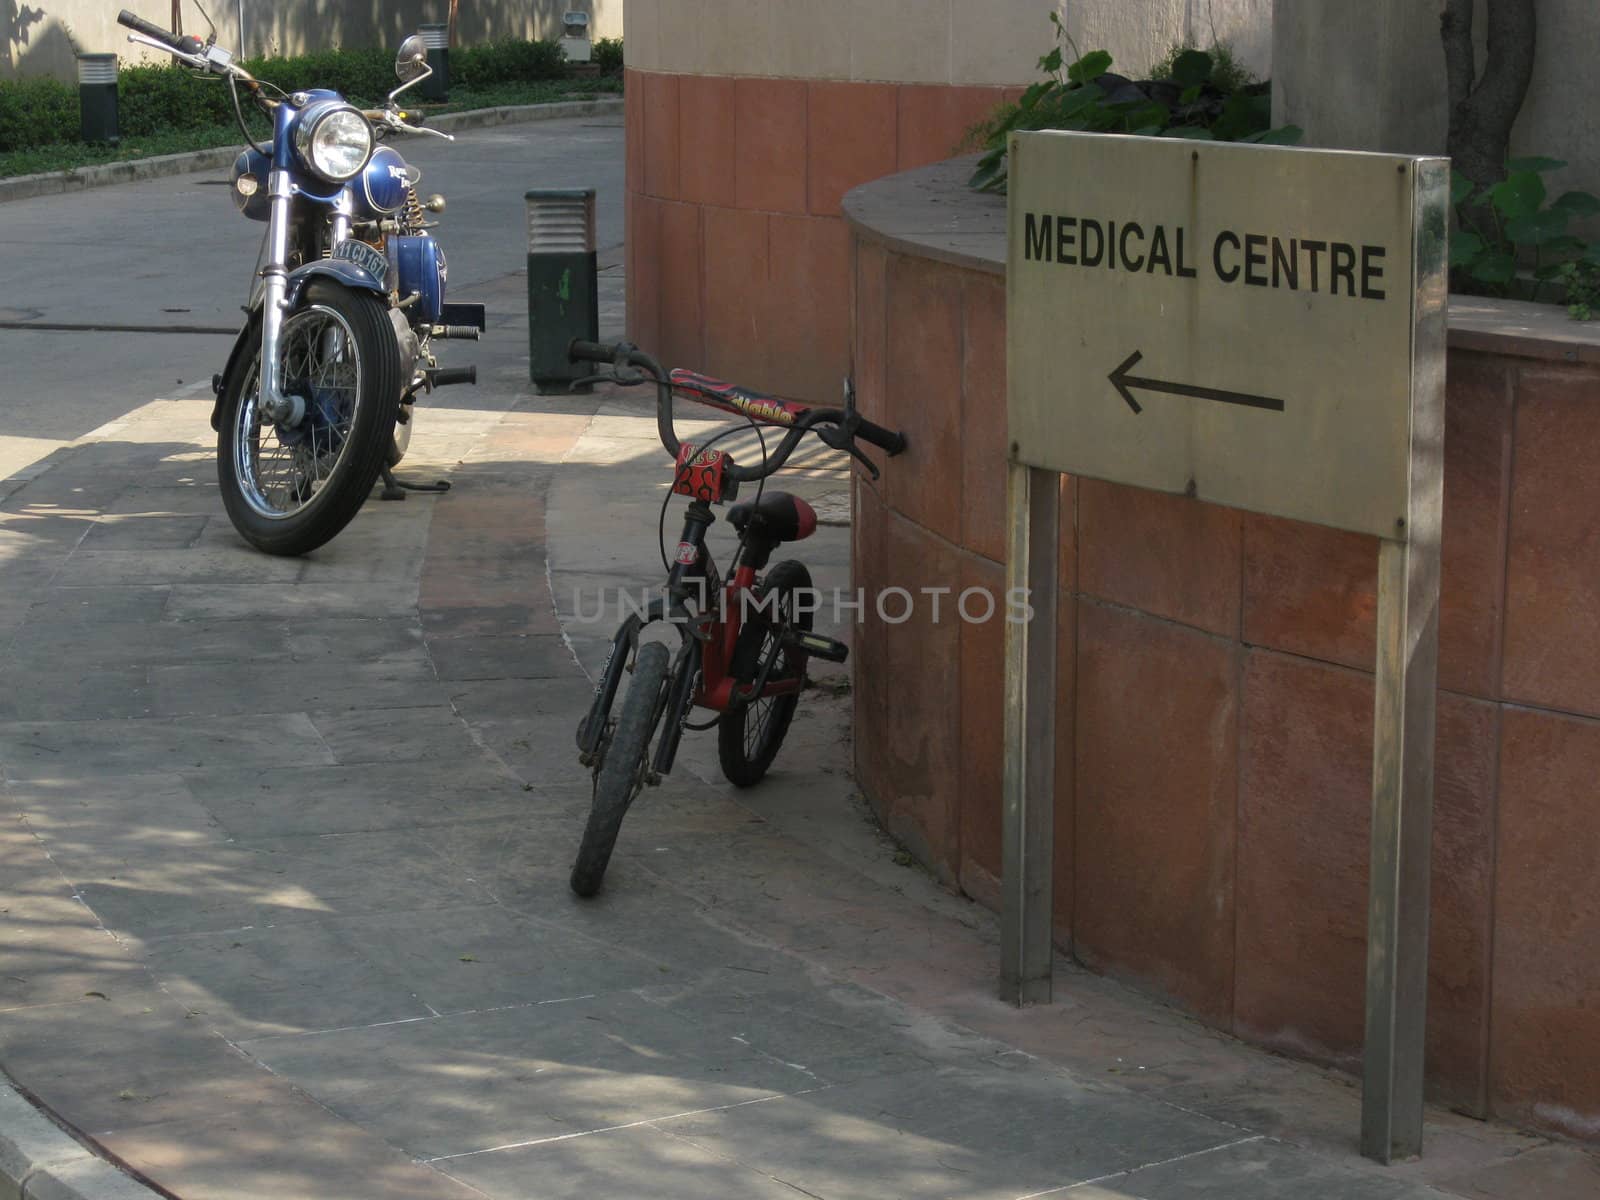 A sign pointing towards the medical Centre